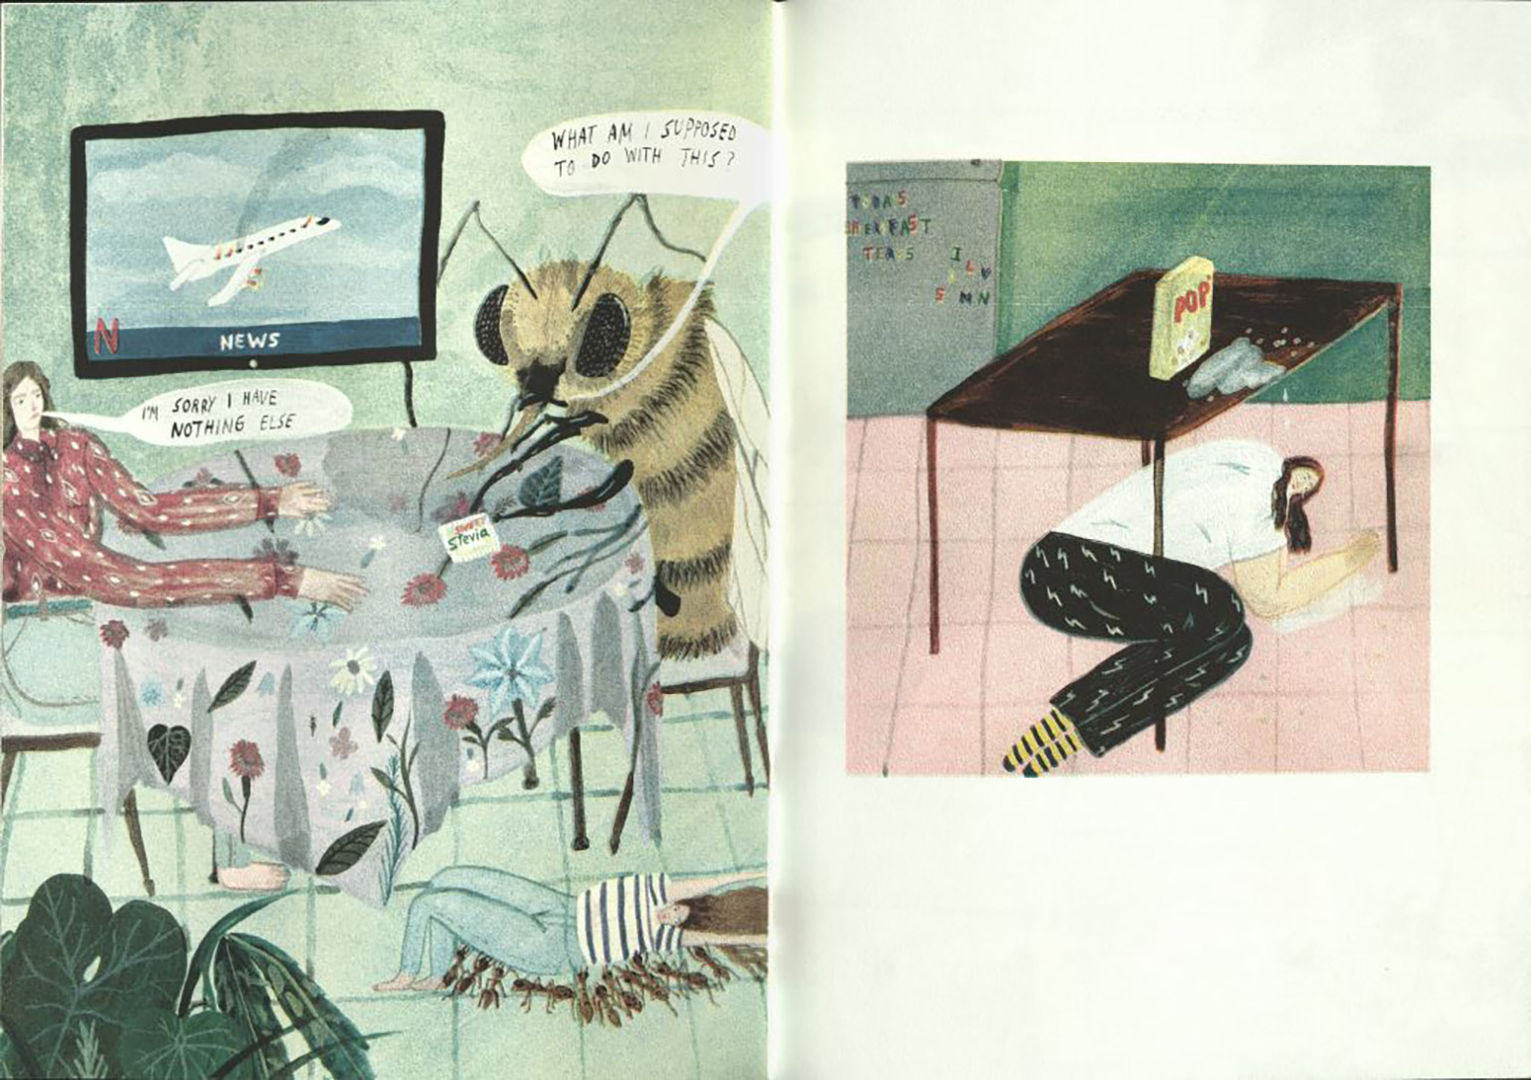 Open to a spread from the zine featuring a woman and a giant bee